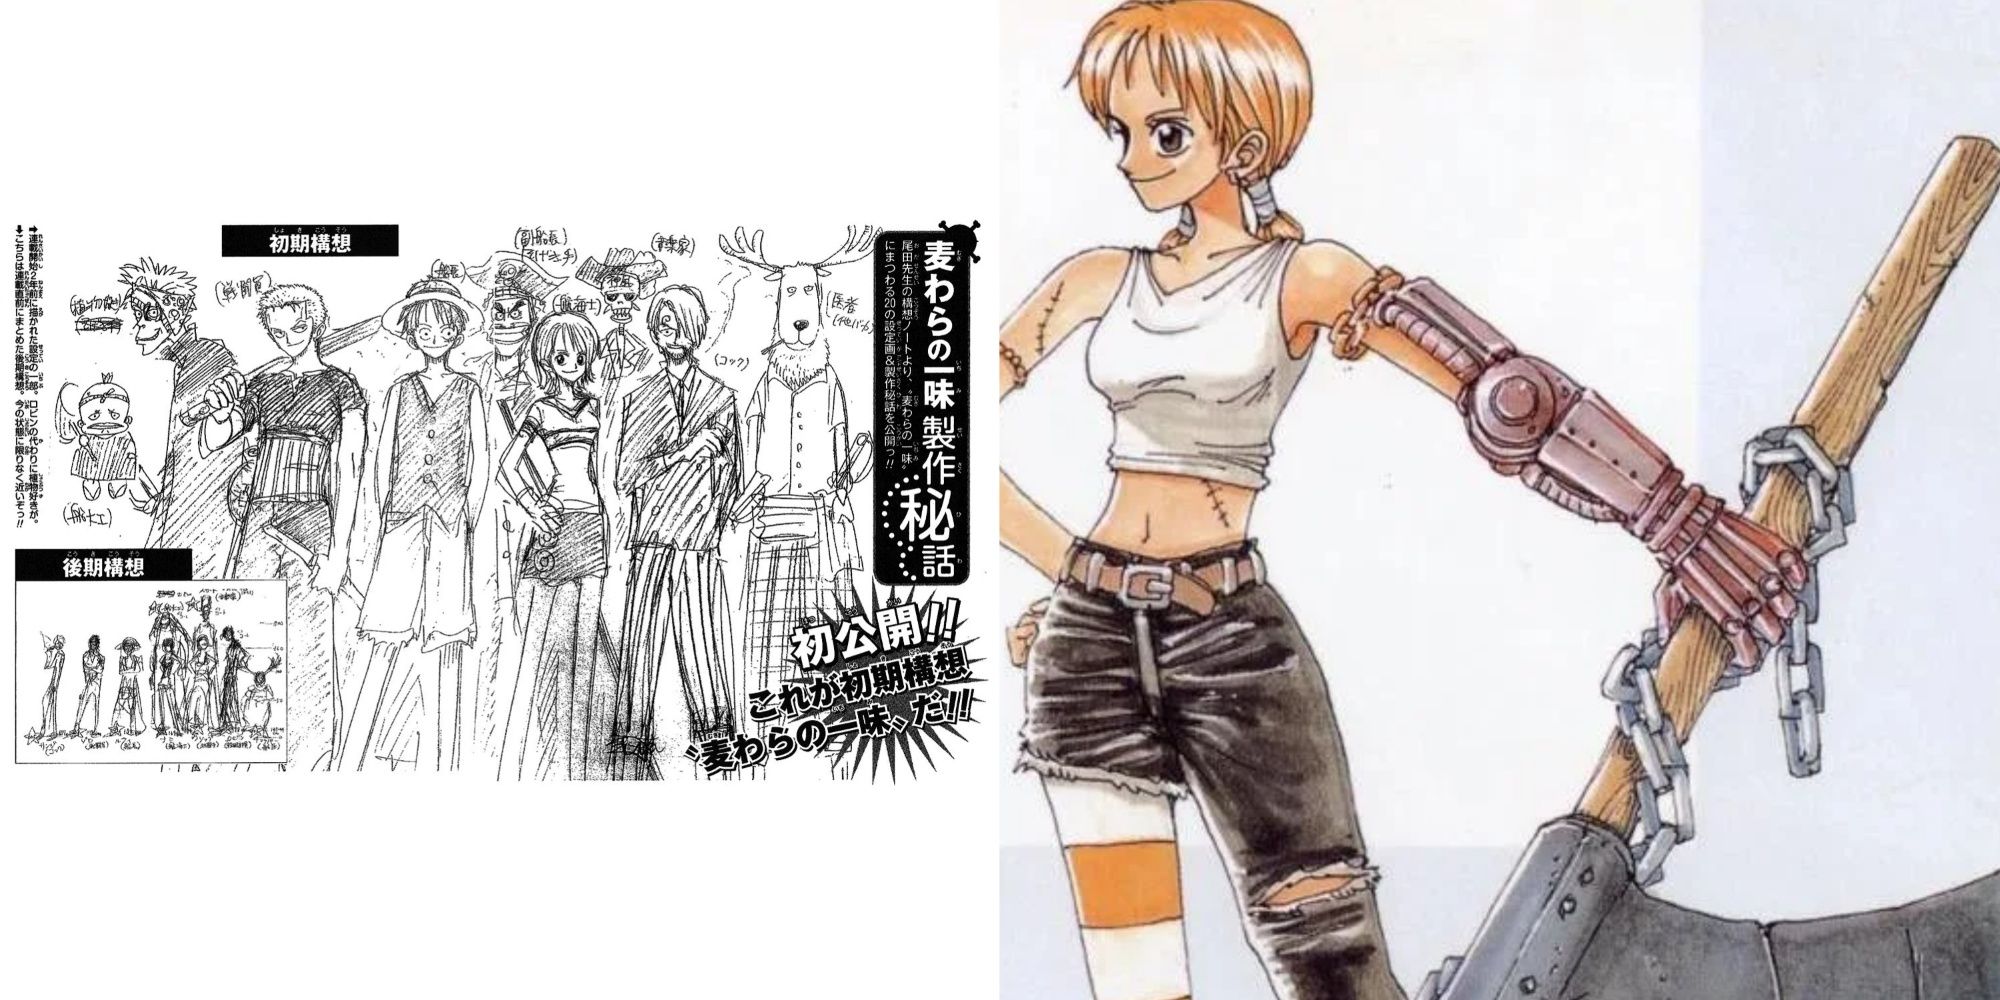 Original Character Designs Of One Piece Characters